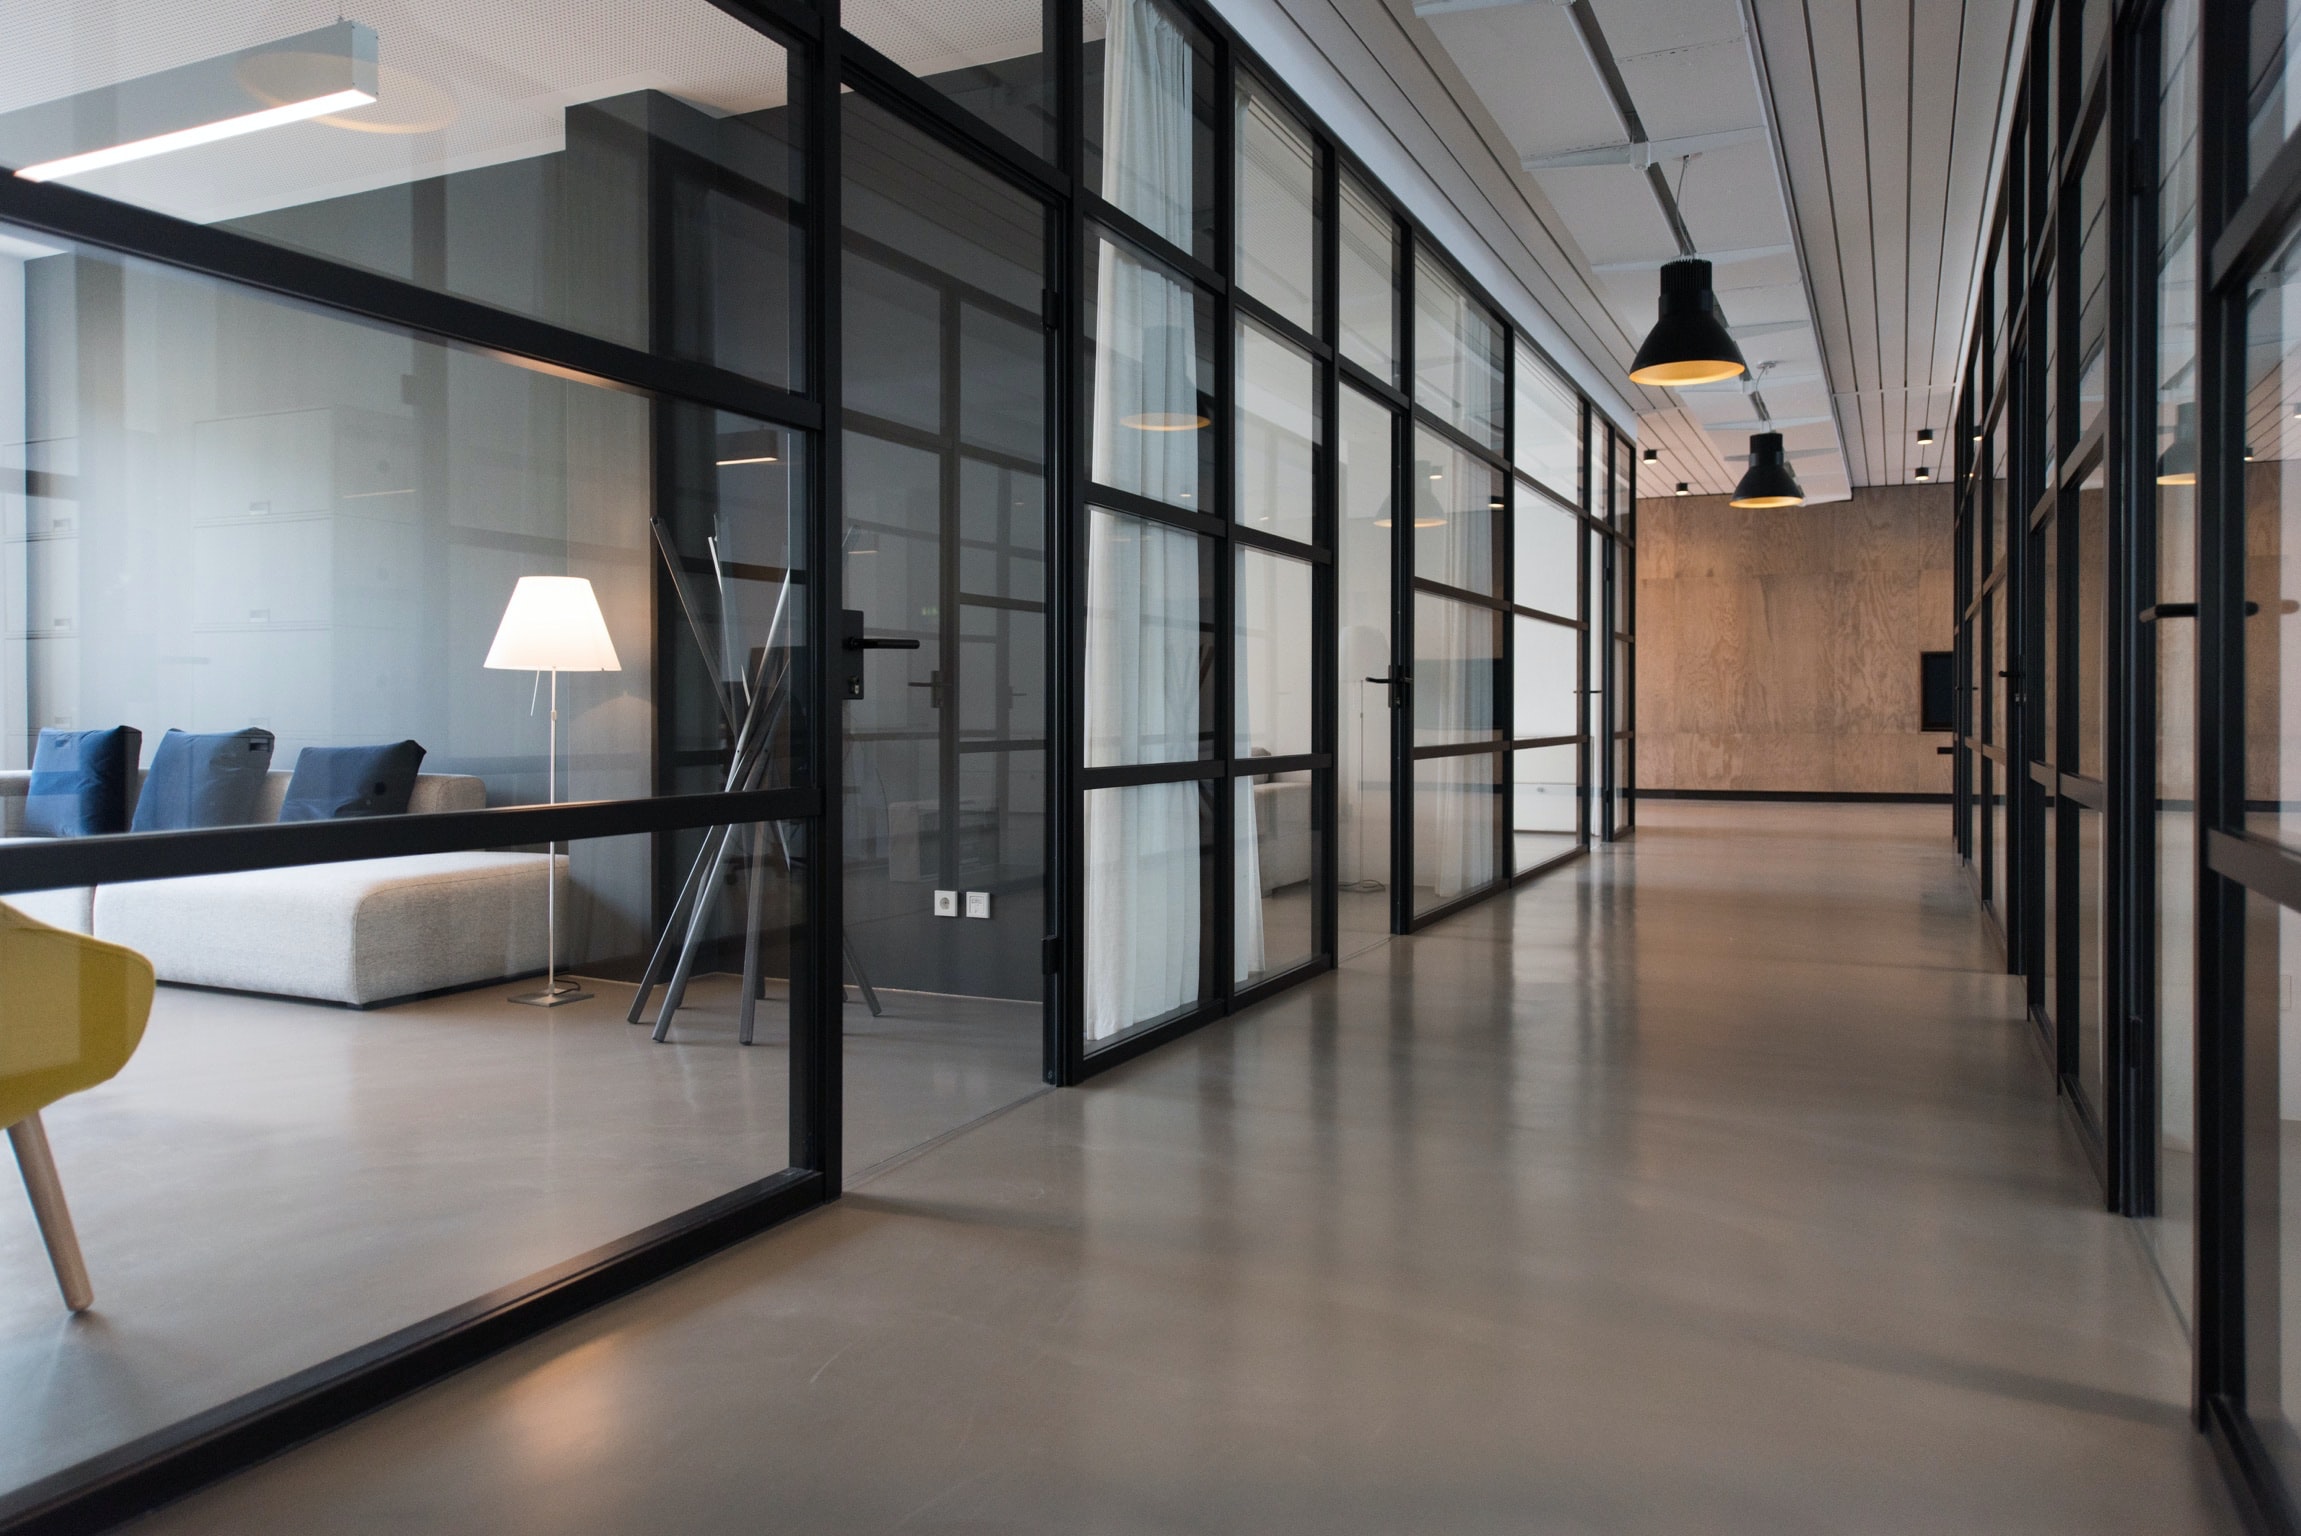 Corporate industrial office hallway with windows